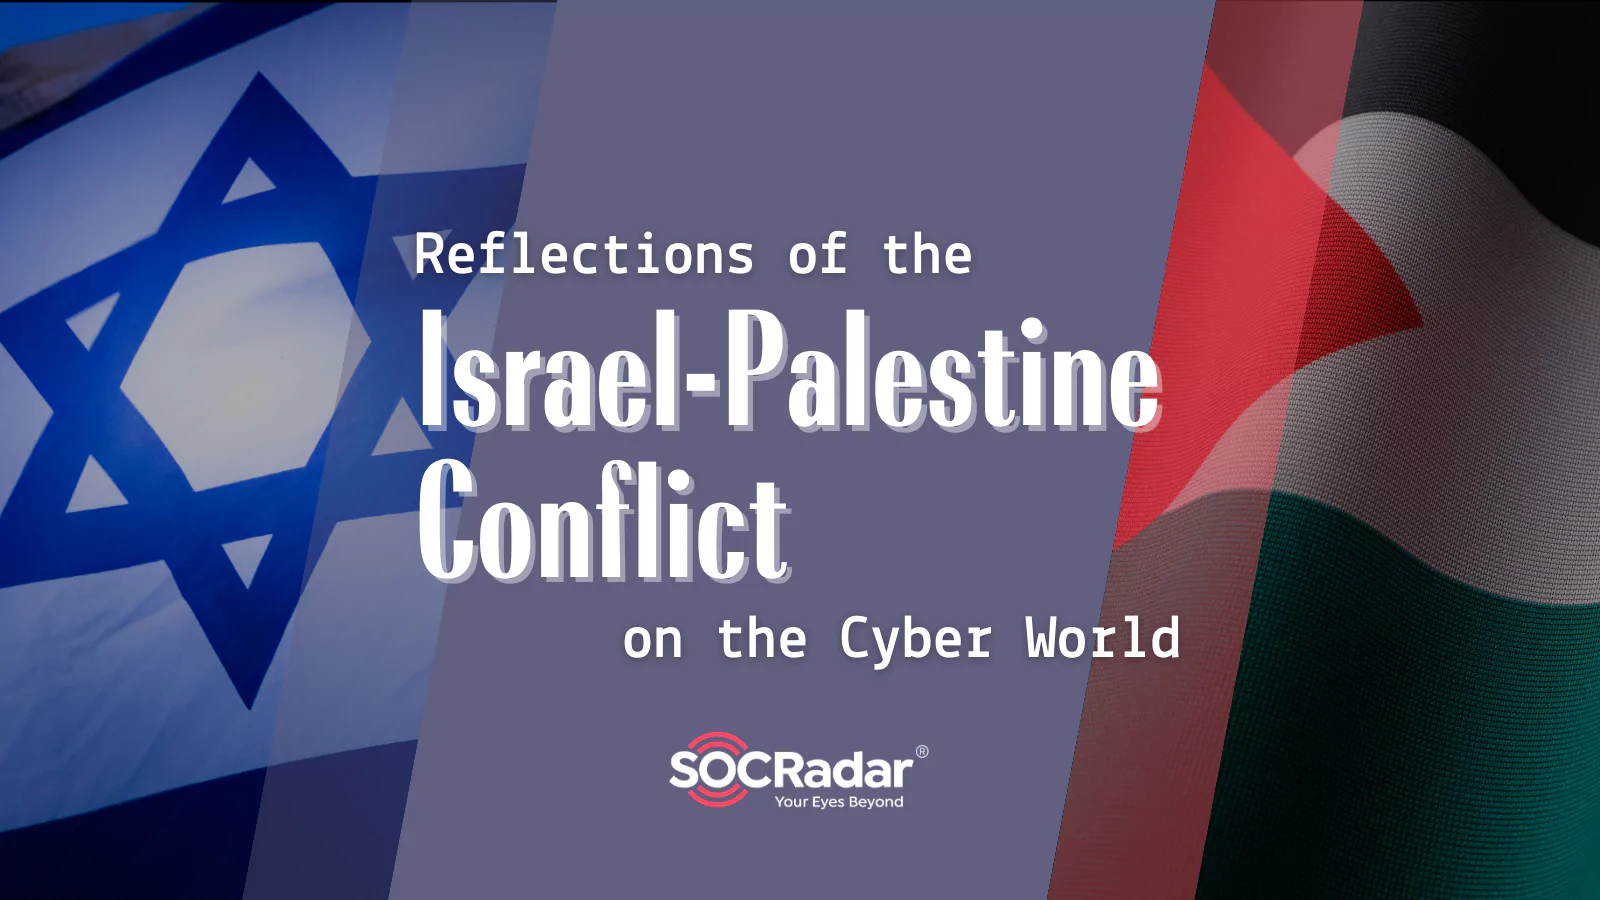 SOCRadar® Cyber Intelligence Inc. | Reflections of the Israel-Palestine Conflict on the Cyber World